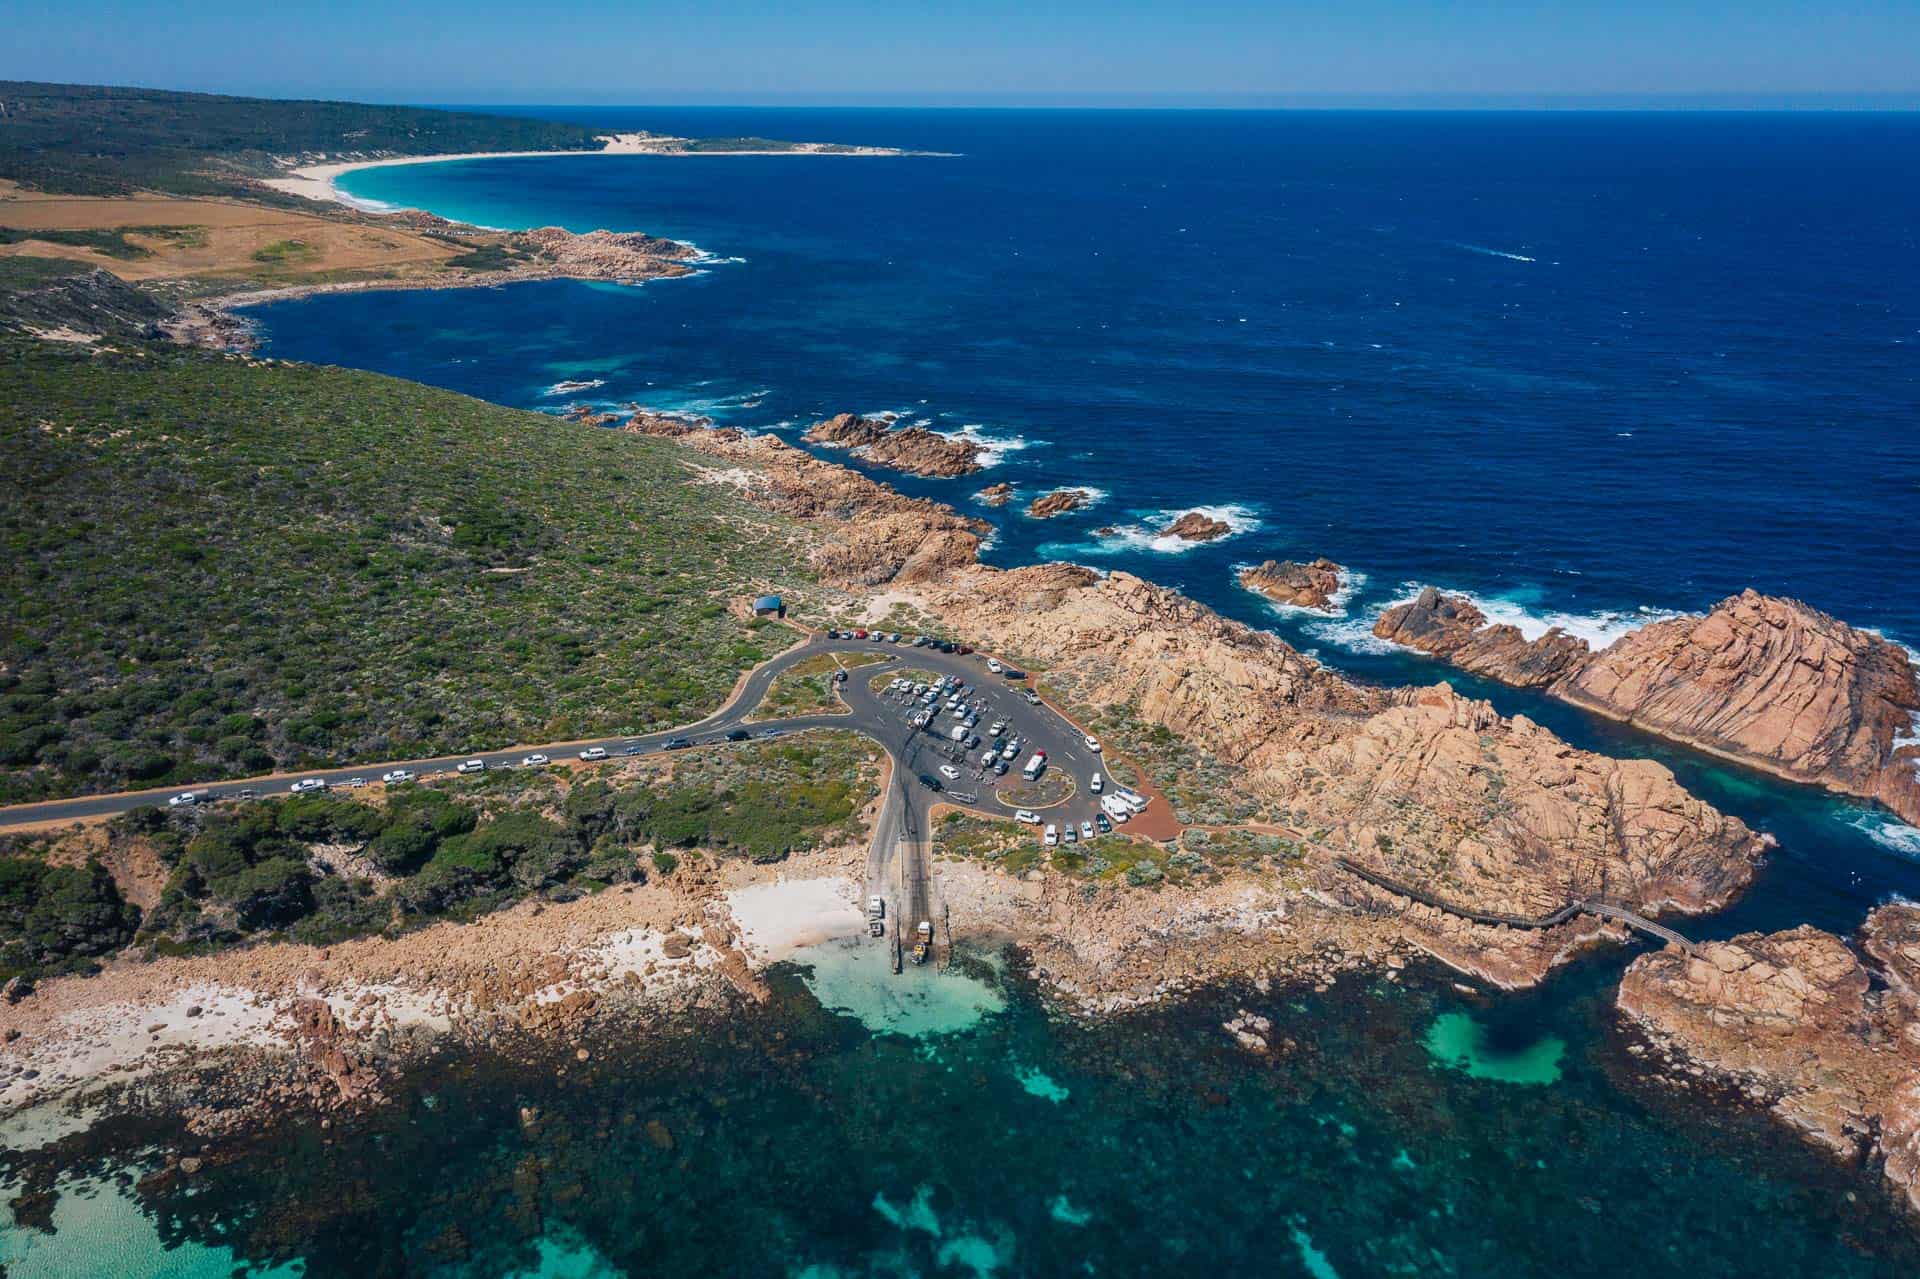 things to do in margaret river, what to do in margaret river, best things to do in margaret river, things to do margaret river, castle rock beach